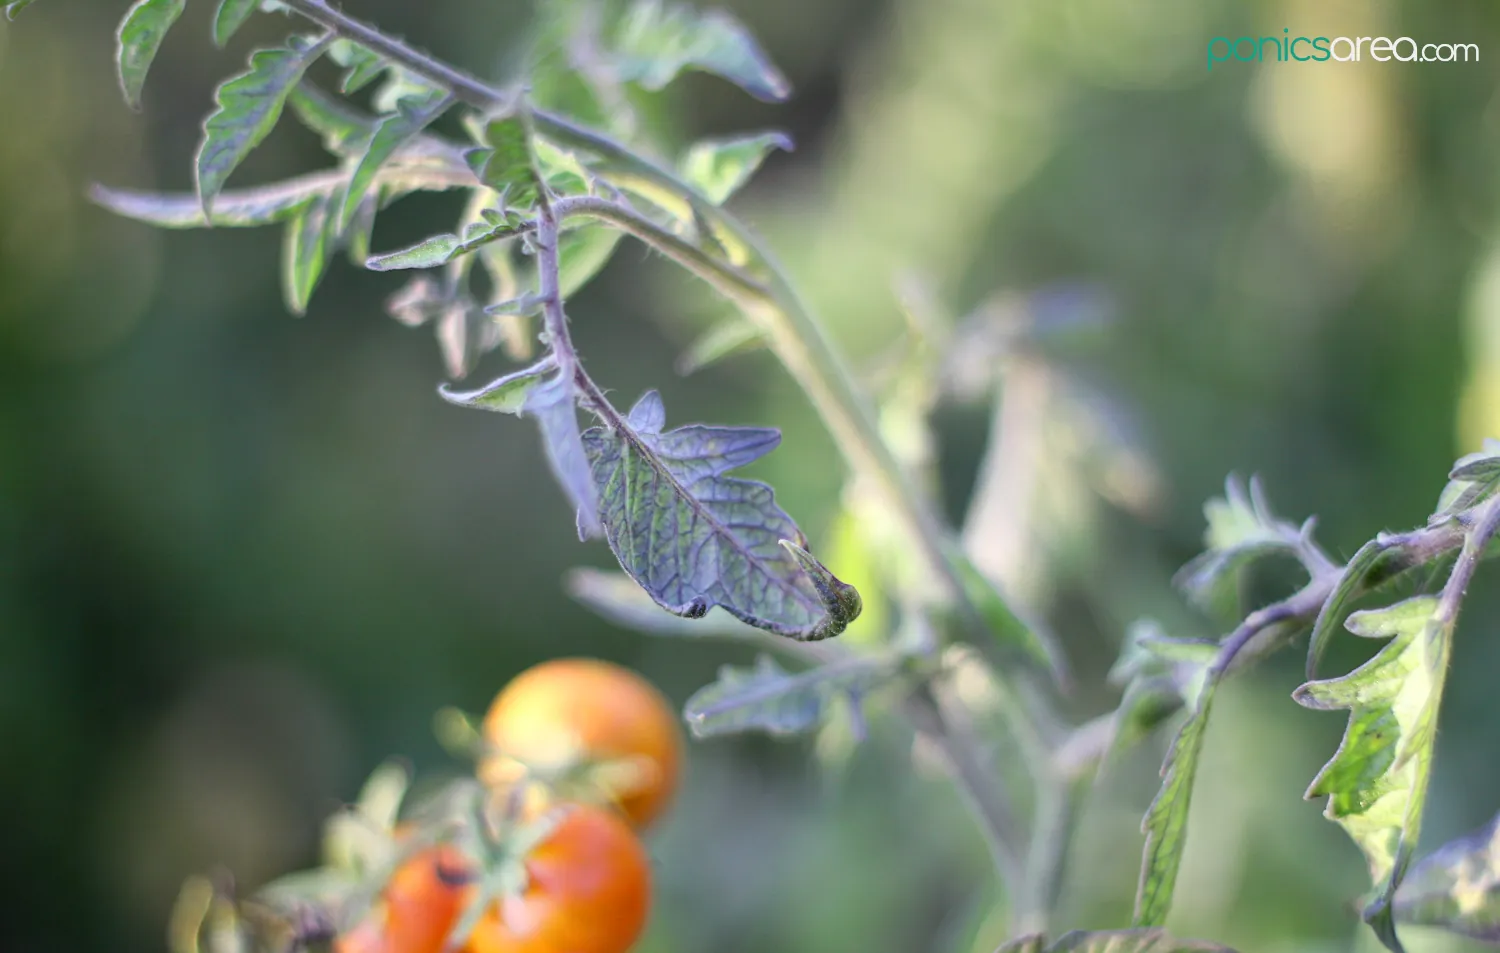 causes of tomato leaves turning purple